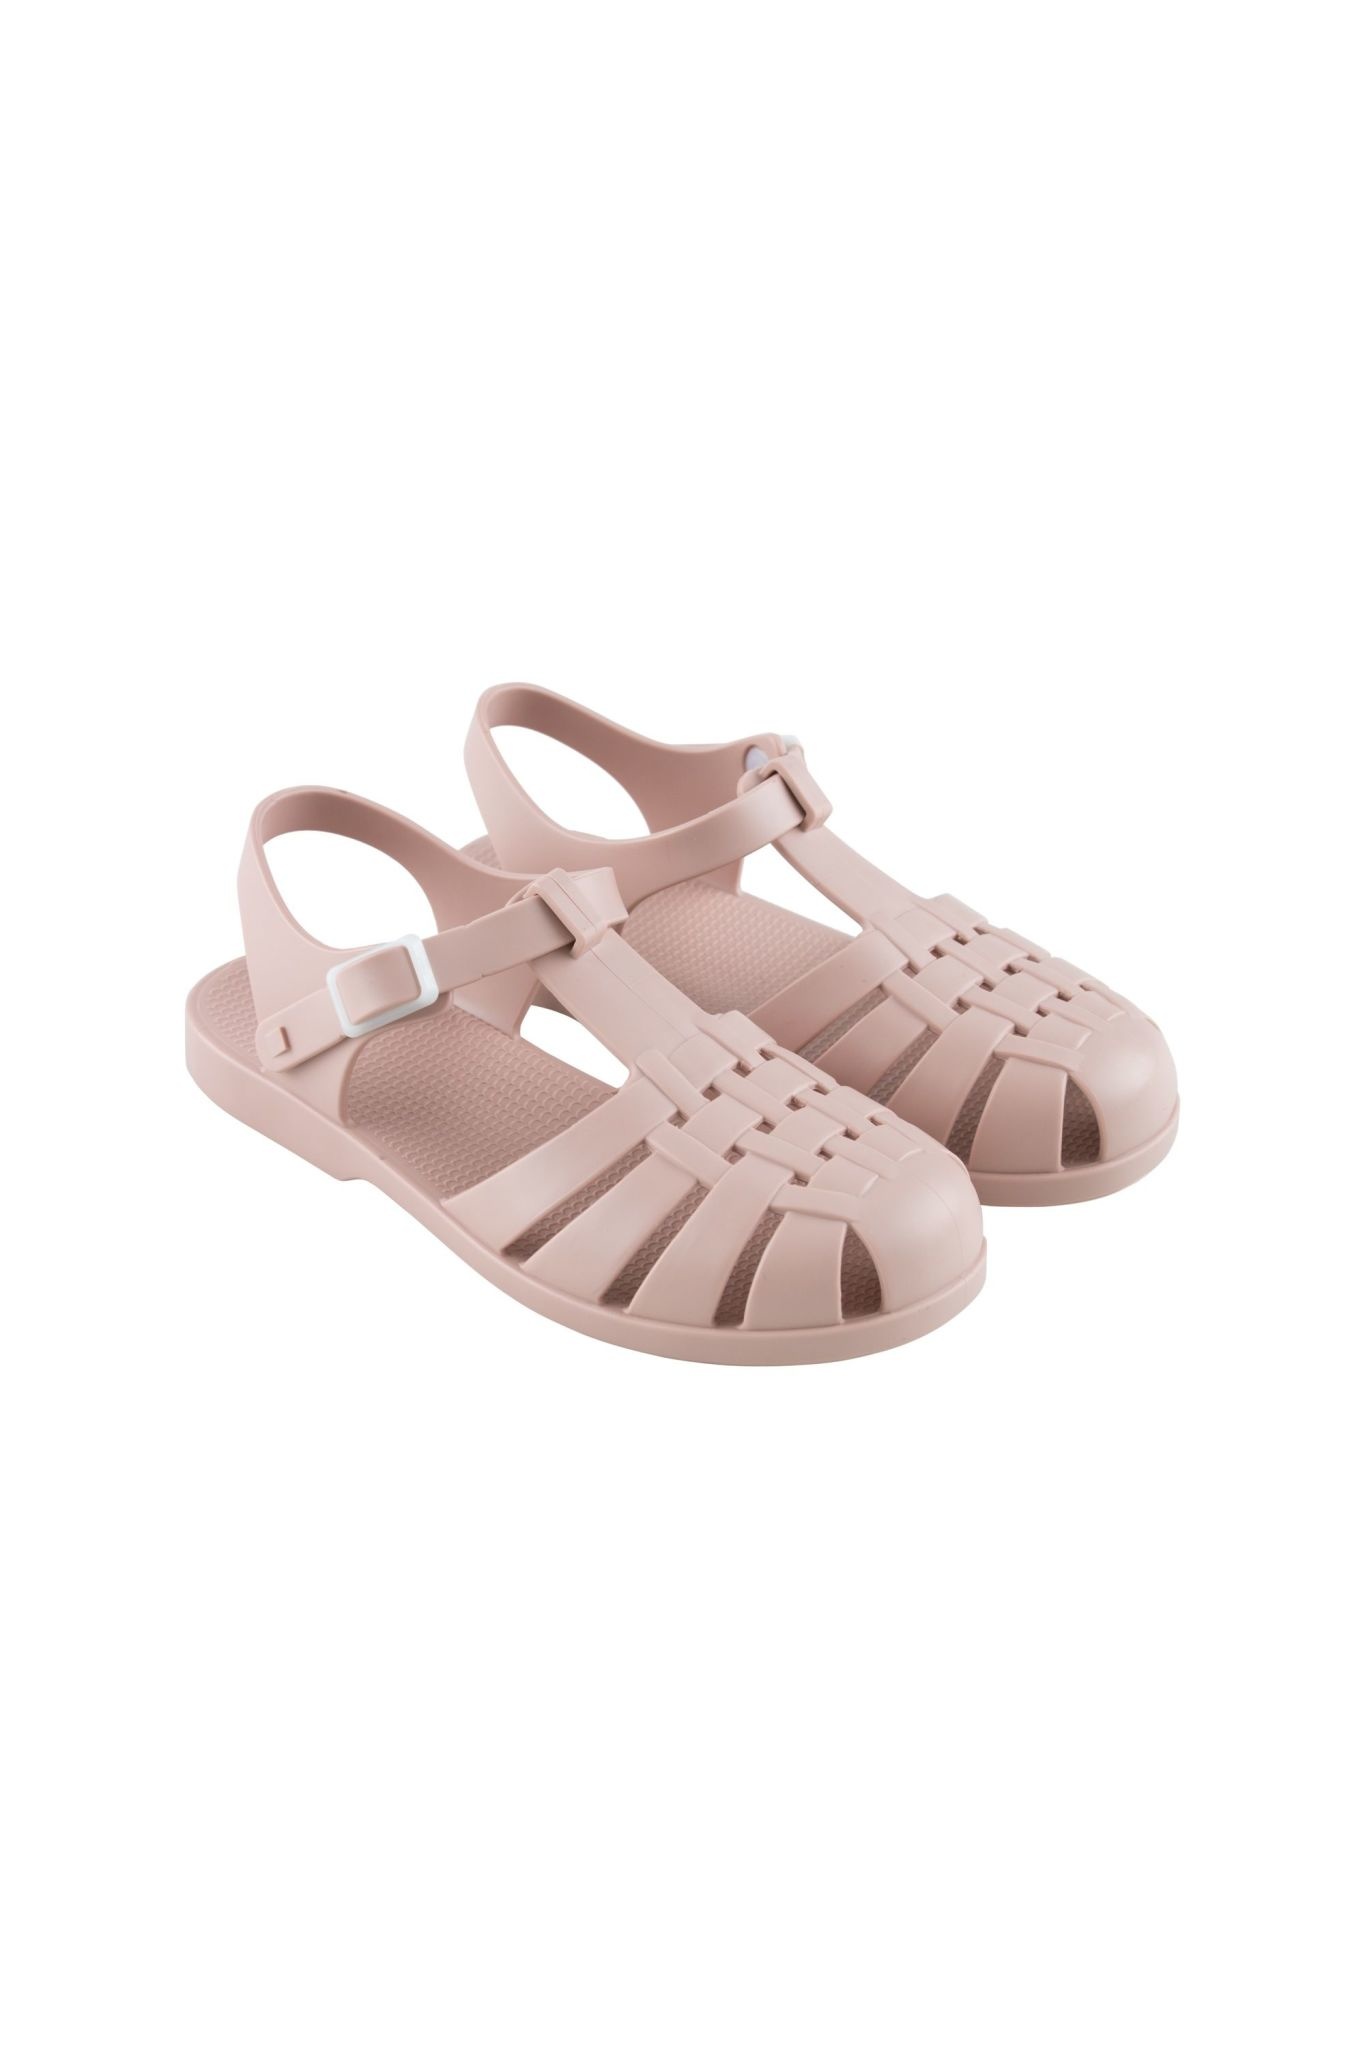 Tiny Cottons Tiny Cottons - Jelly sandals